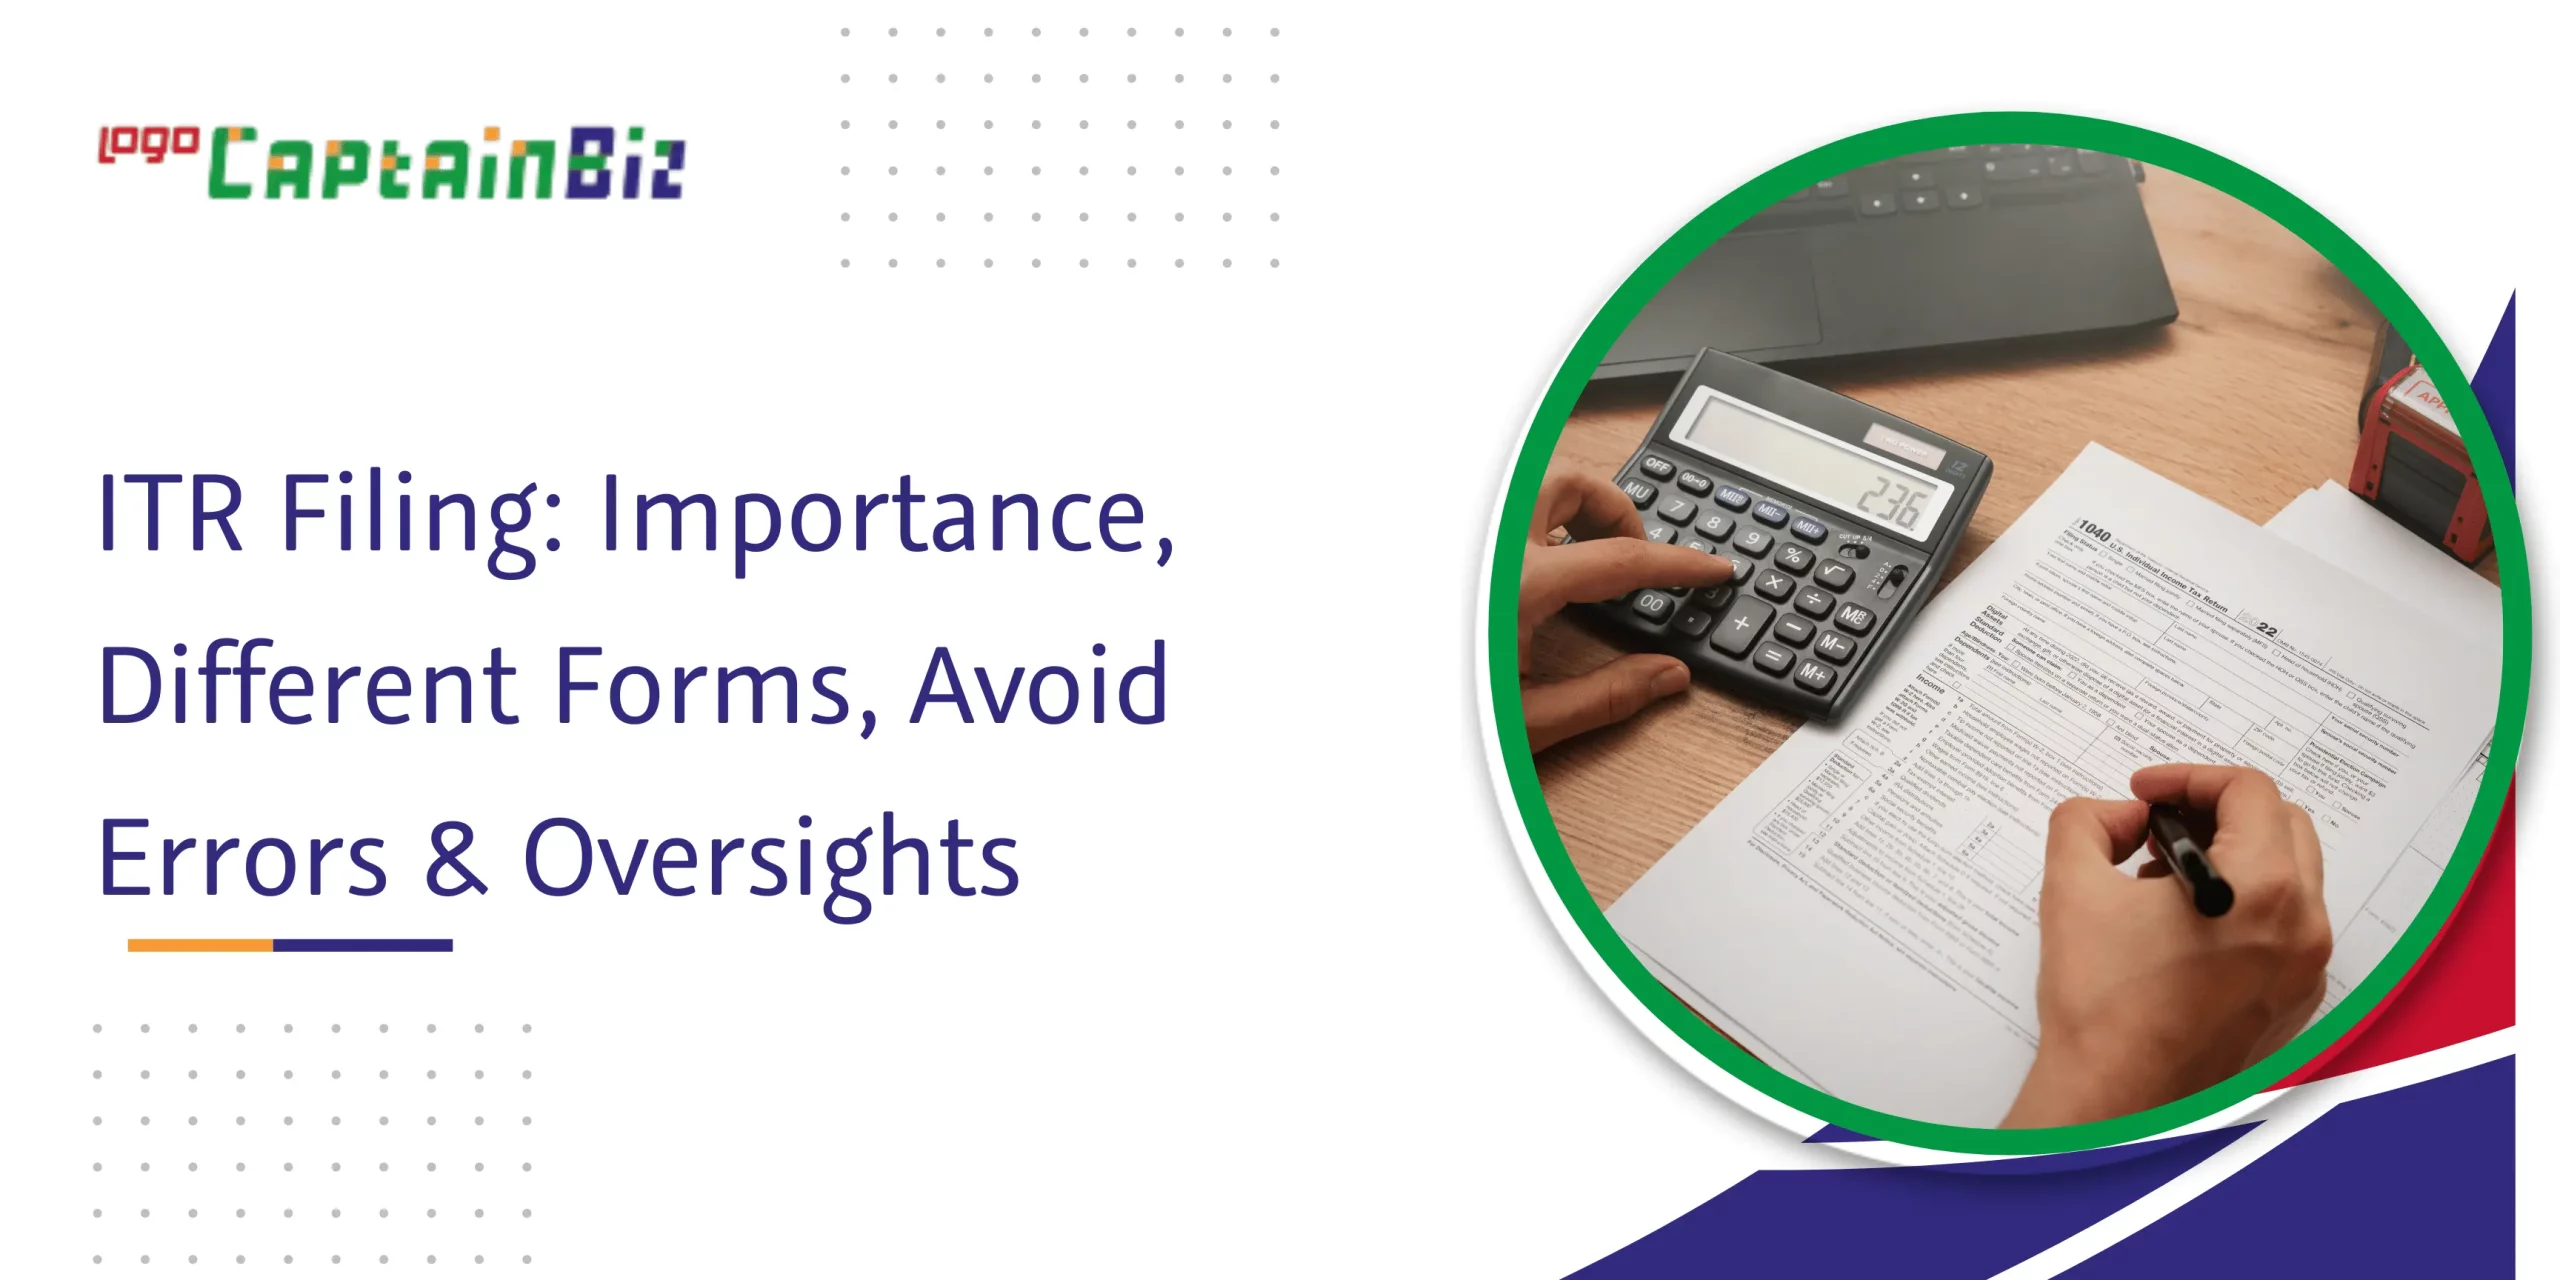 CaptainBiz: itr filing: importance, different forms, avoid errors & oversights